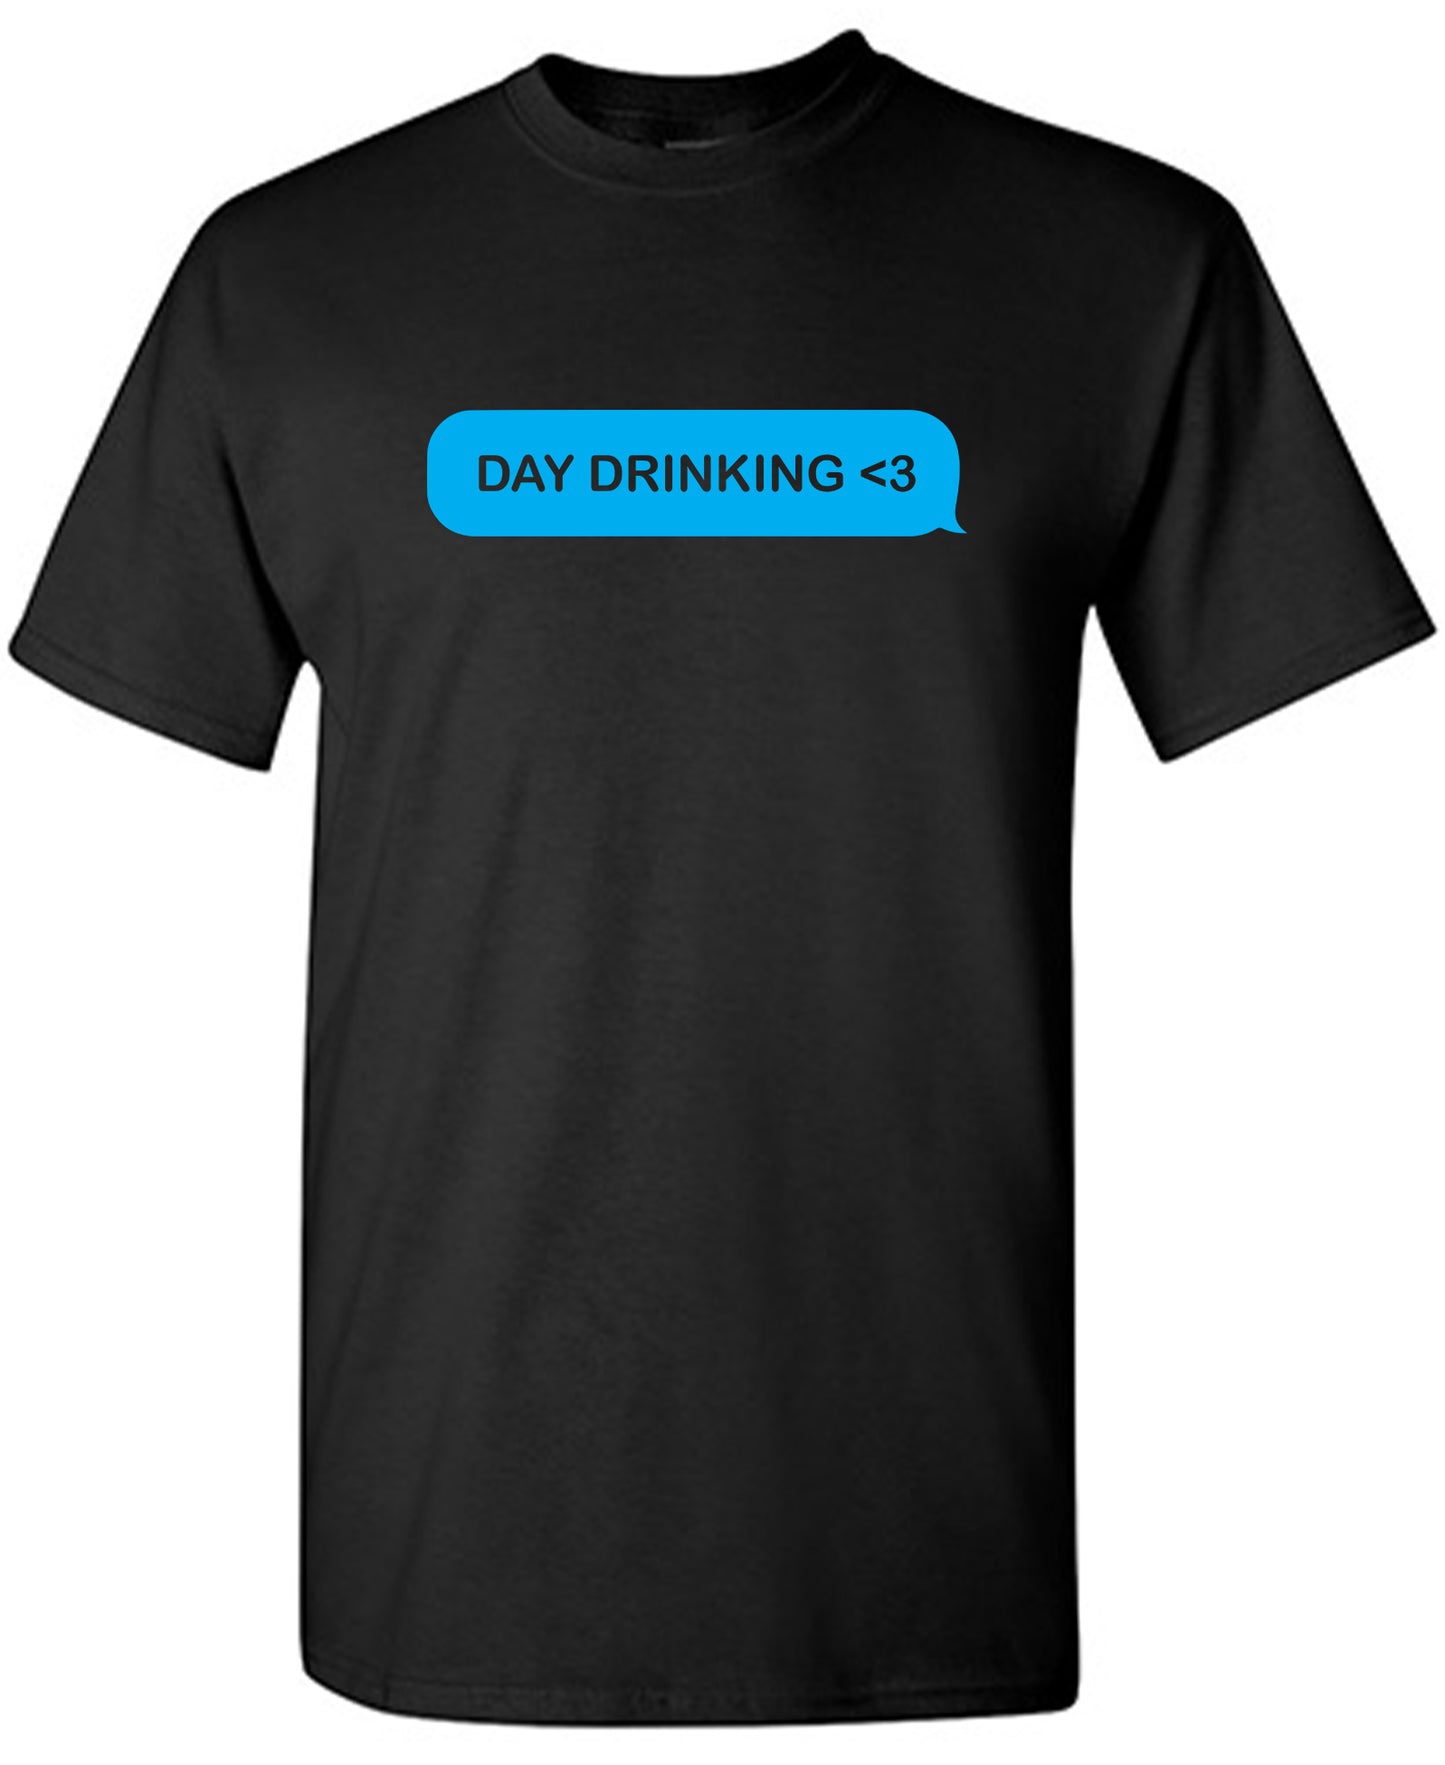 Day Drinking <3 Heart Shirt - Funny T Shirts & Graphic Tees